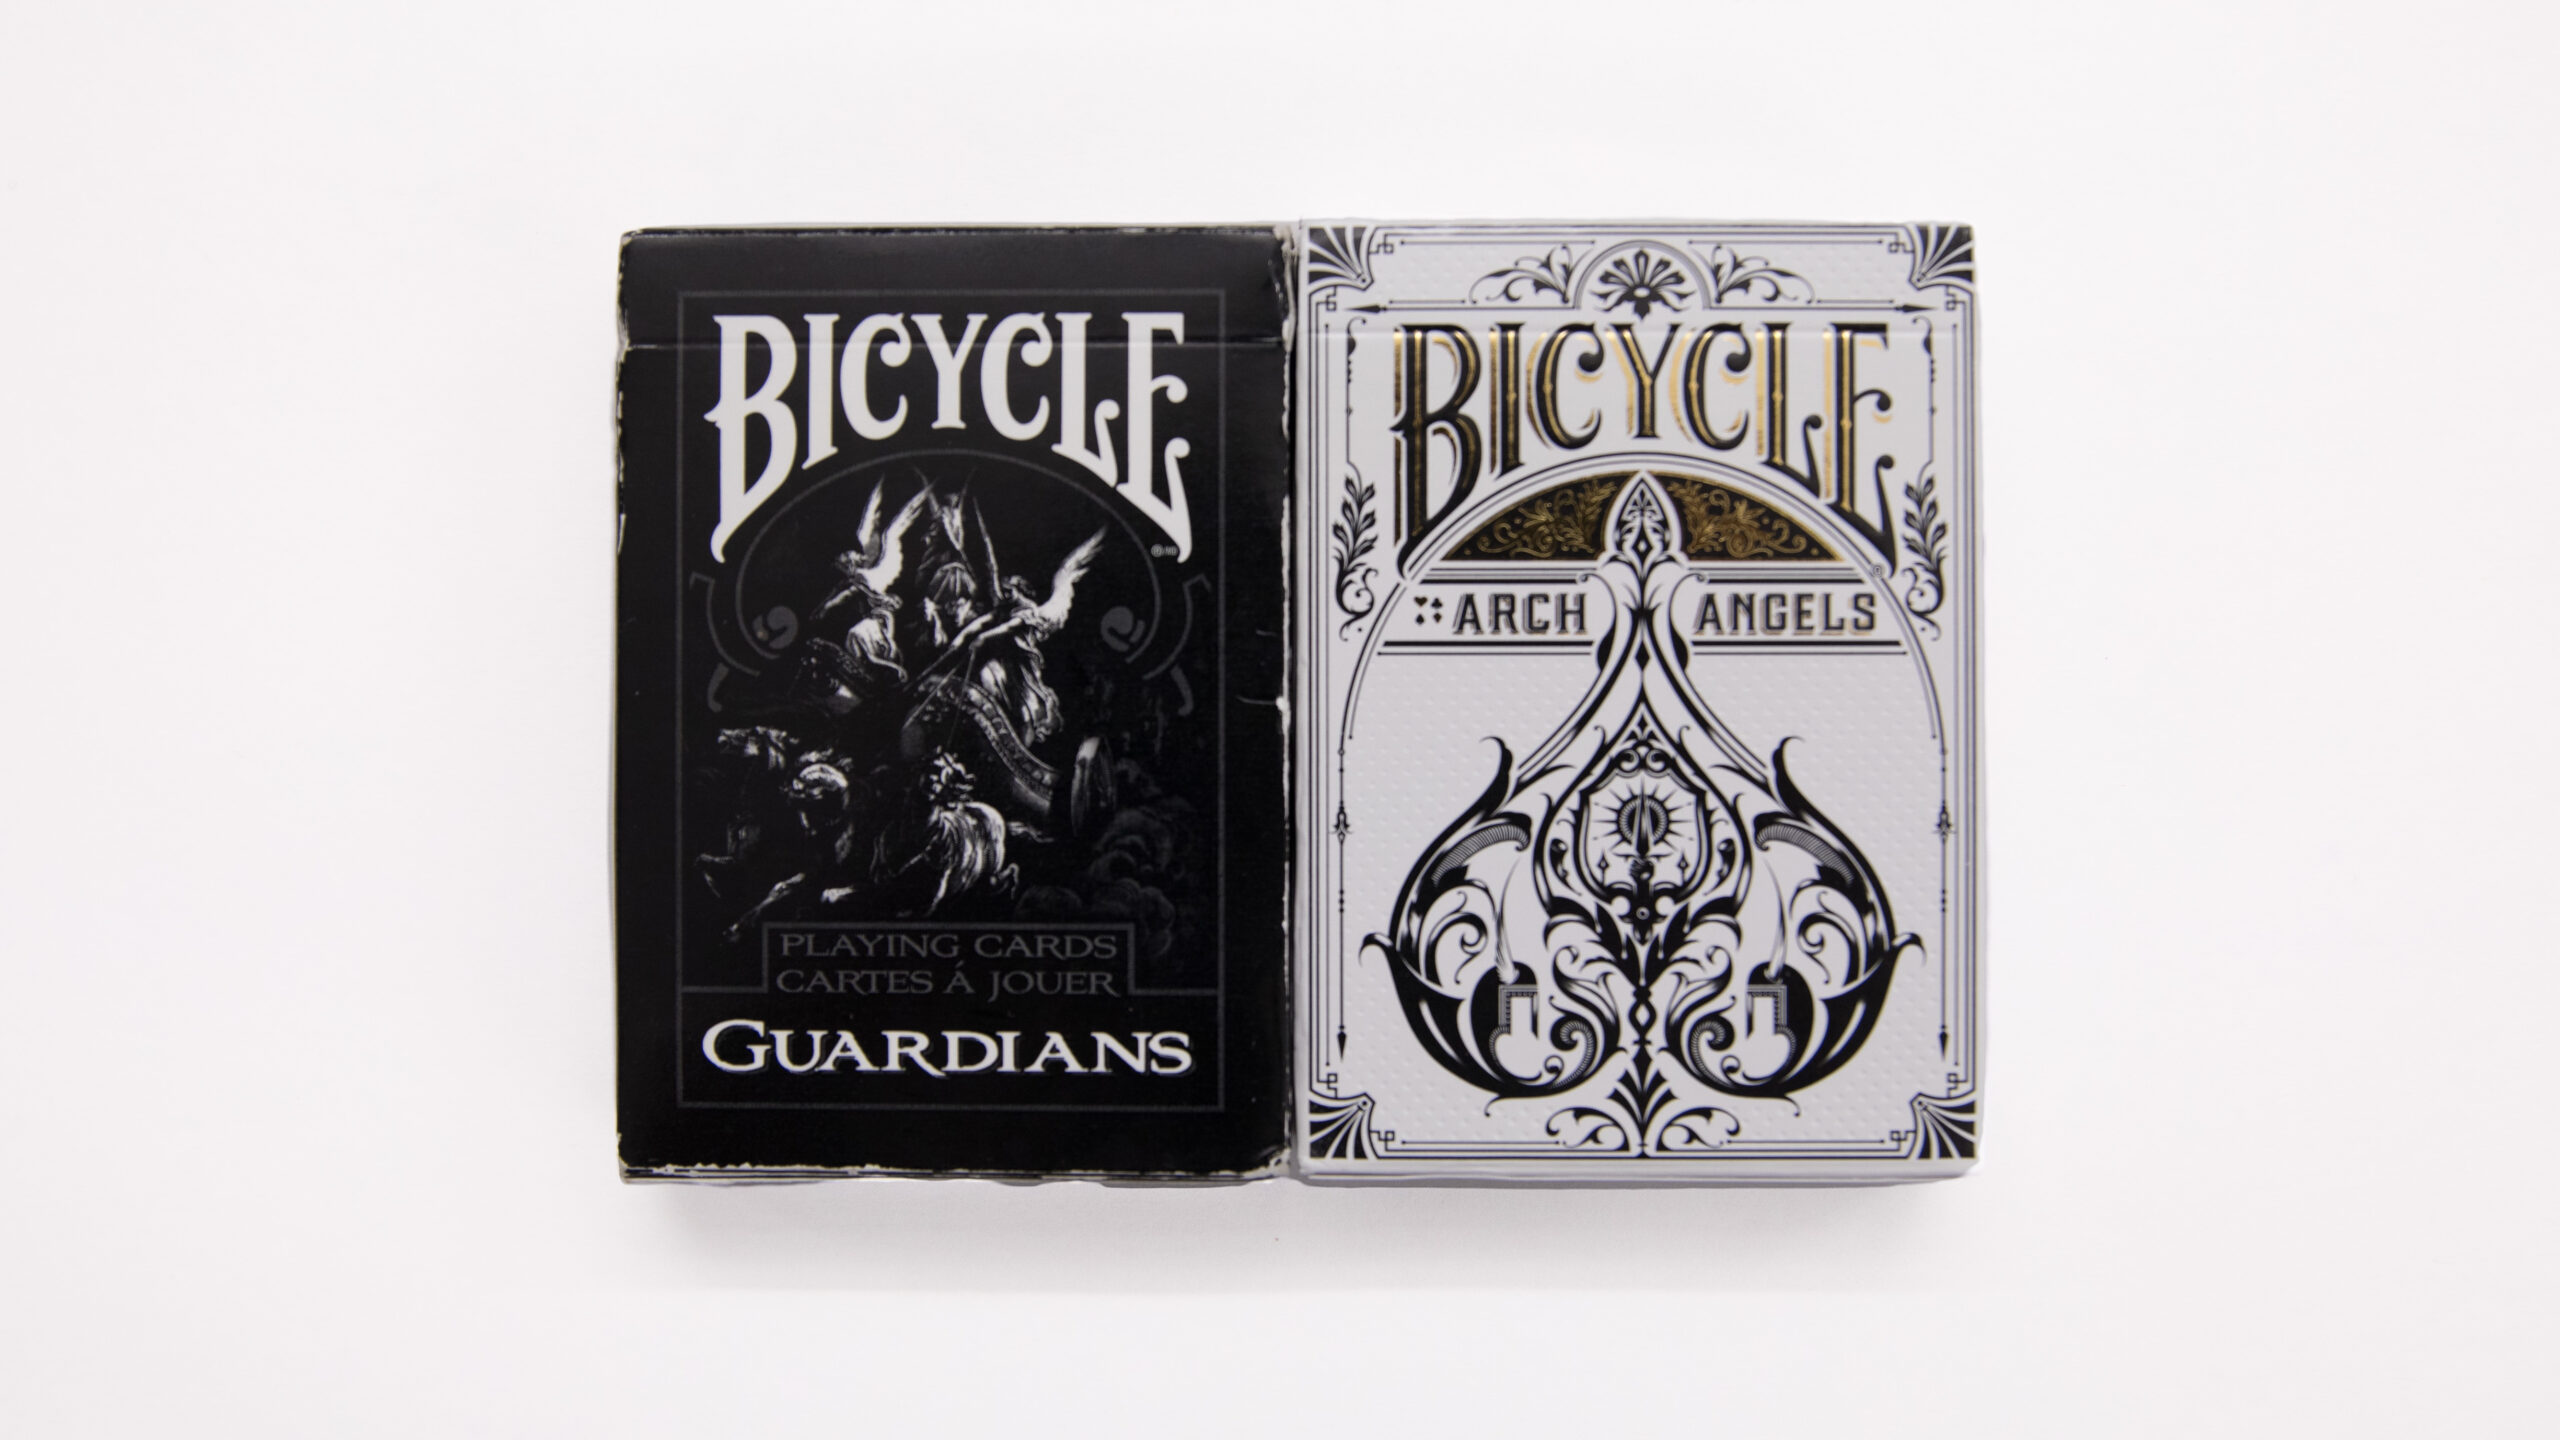 2 adjacent decks of Bicycle playing cards. a black one marked 